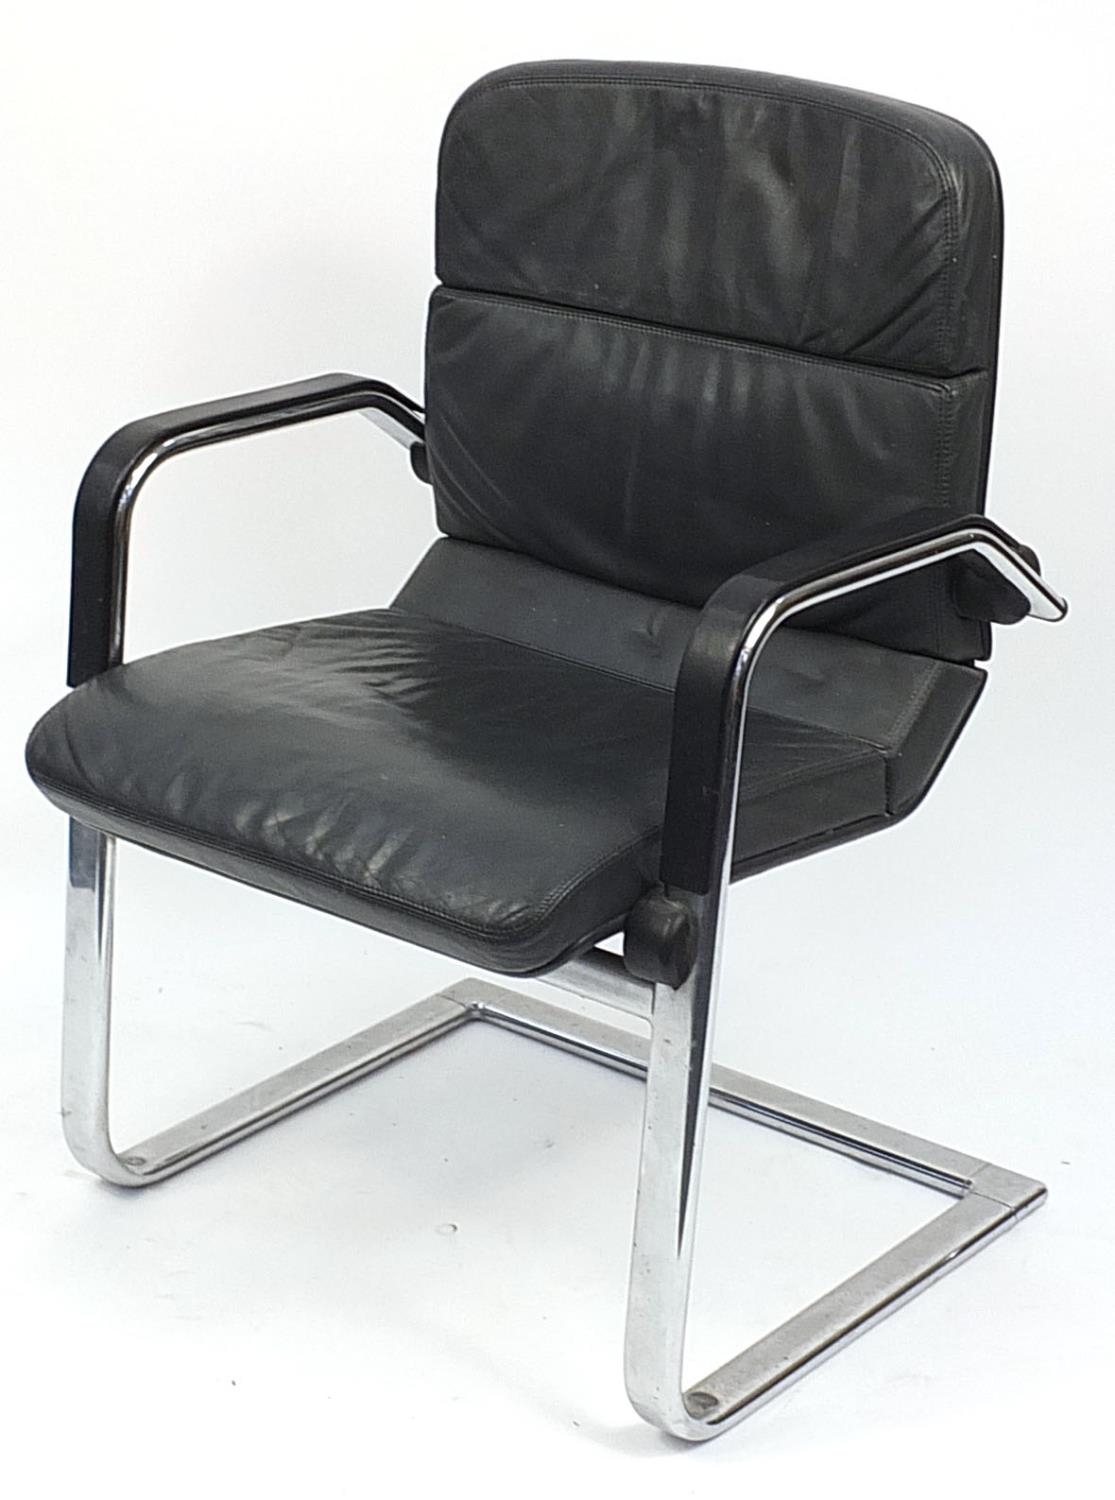 Ahren de Cirkel, Danish black leather and chrome recliner office chair, label to the base,